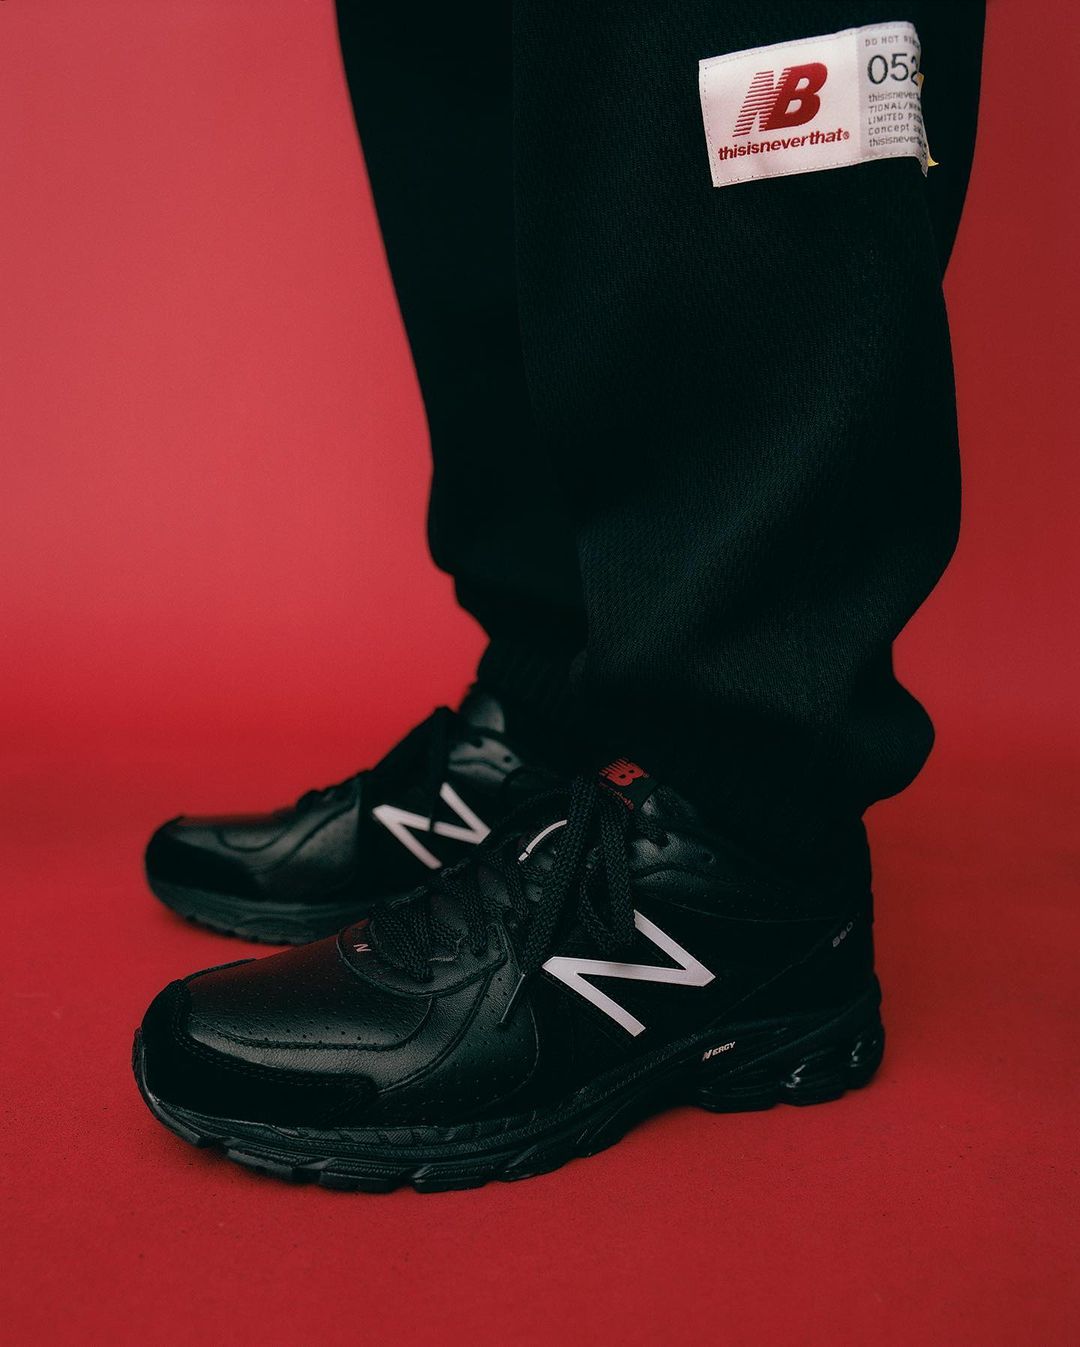 thisisneverthat New Balance 860v2 Release Date Info